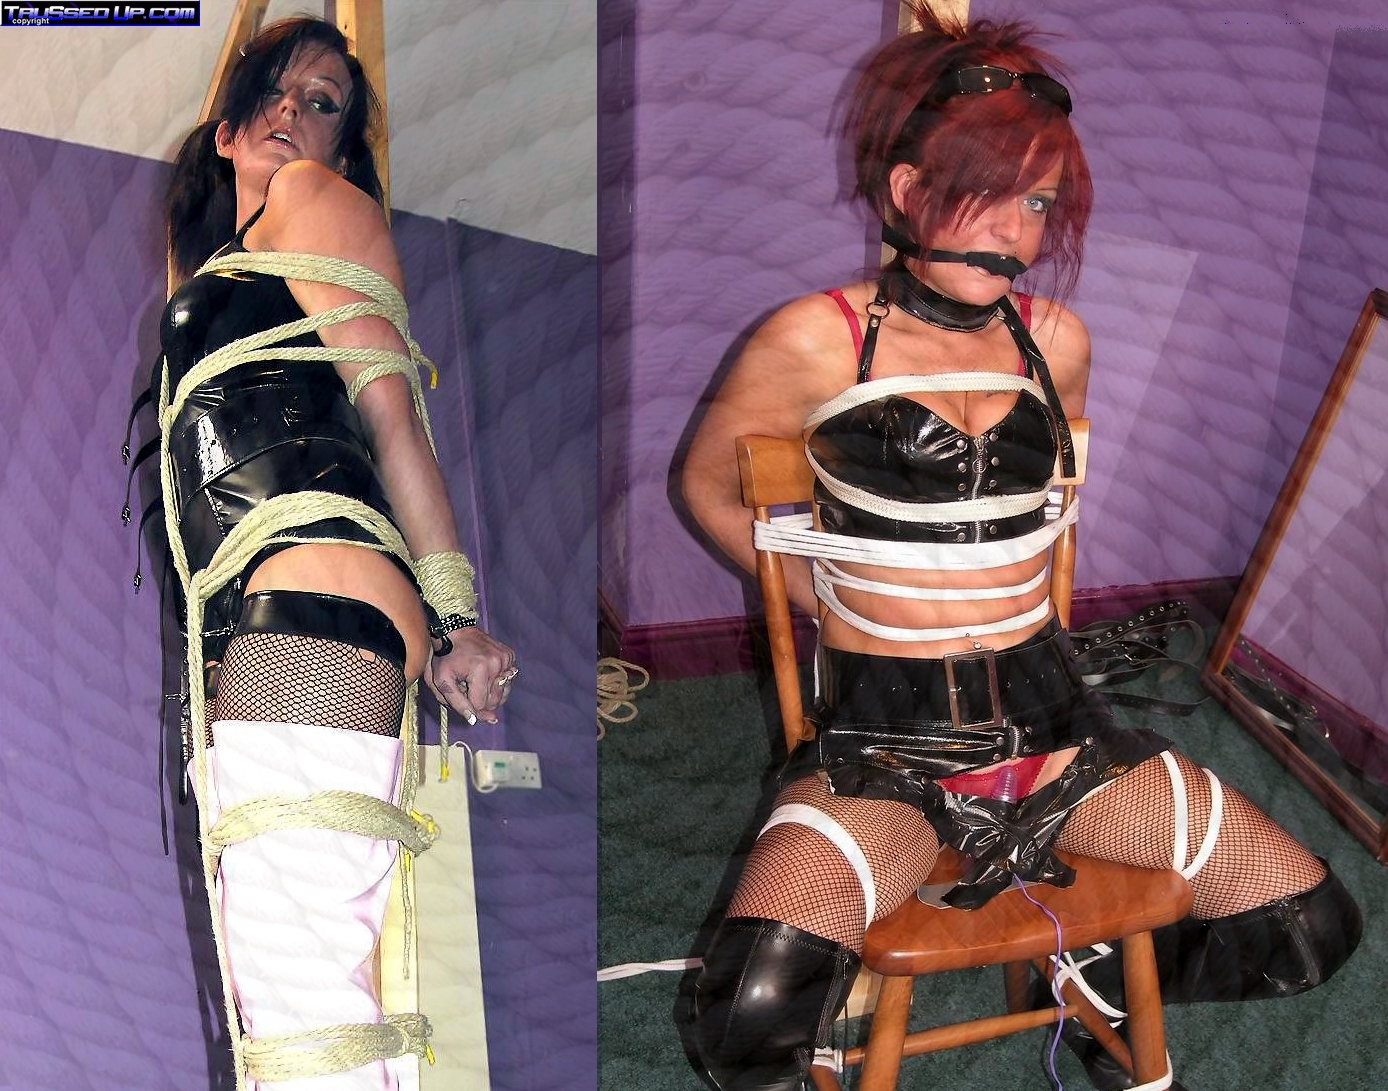 prostitutes in bondage tie me up cum in my mouth hookers tied up